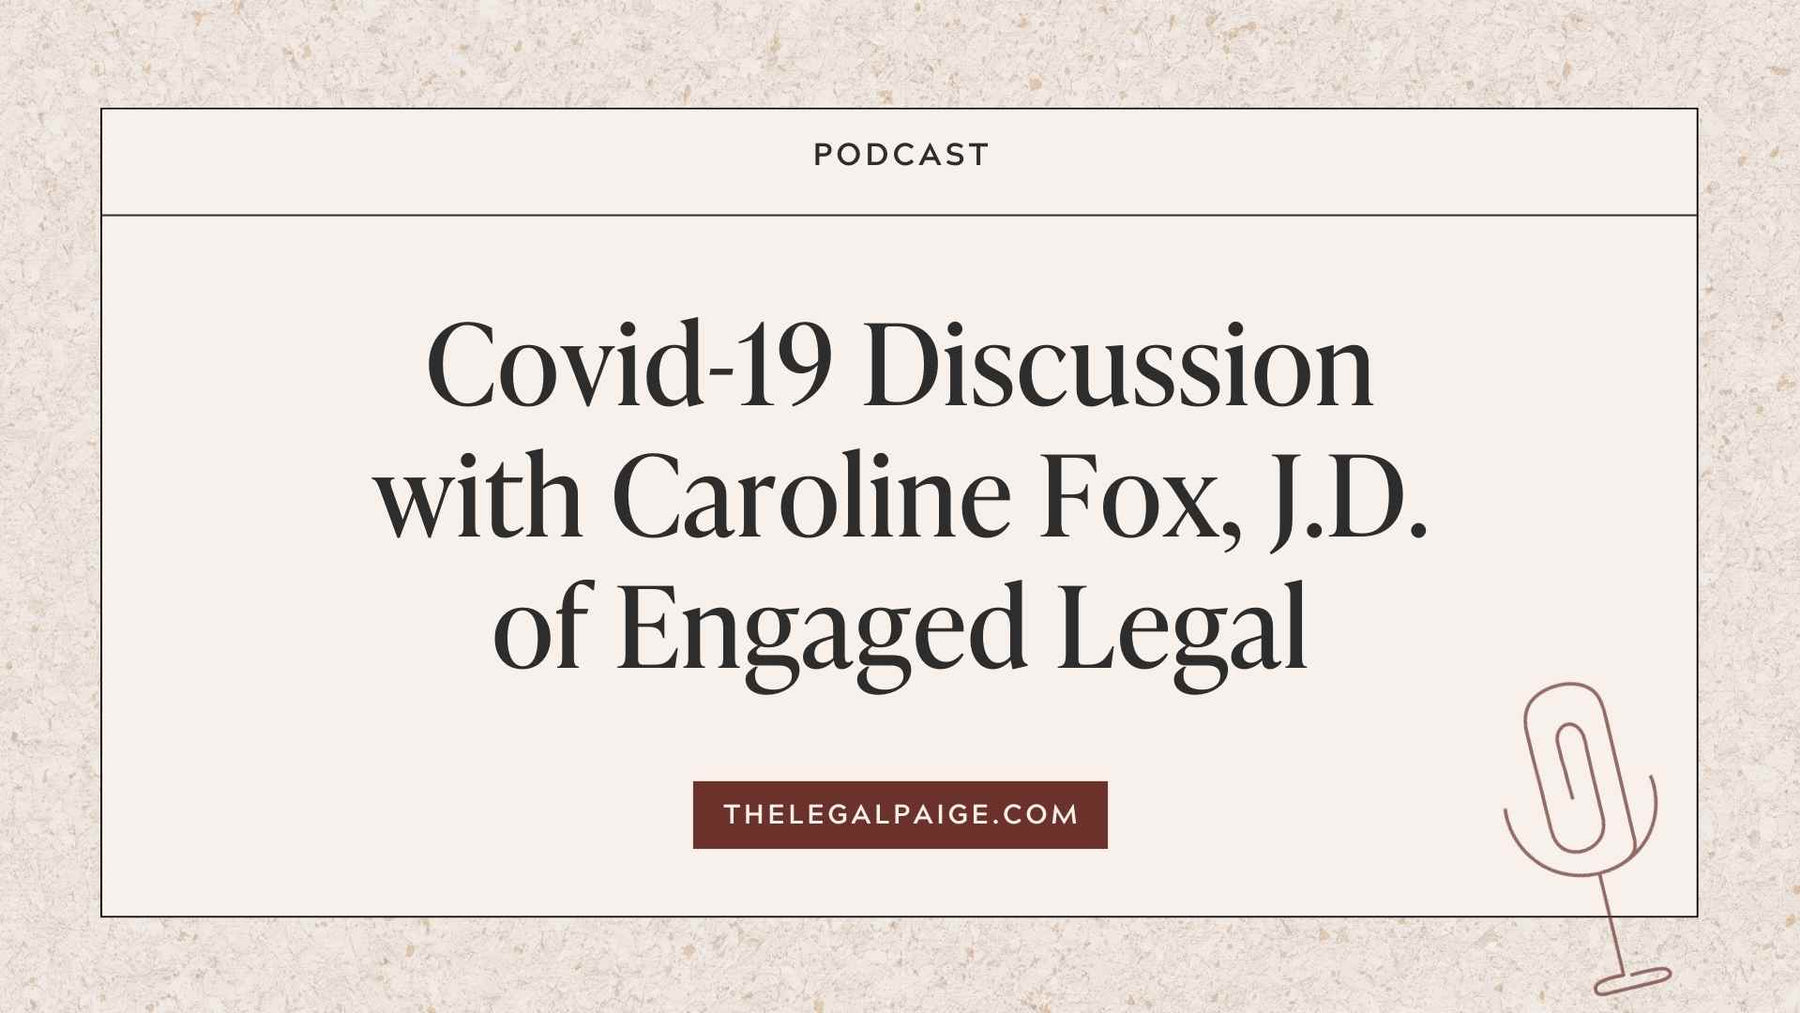 Episode 50: Covid-19 Discussion with Caroline Fox, J.D. of Engaged Legal